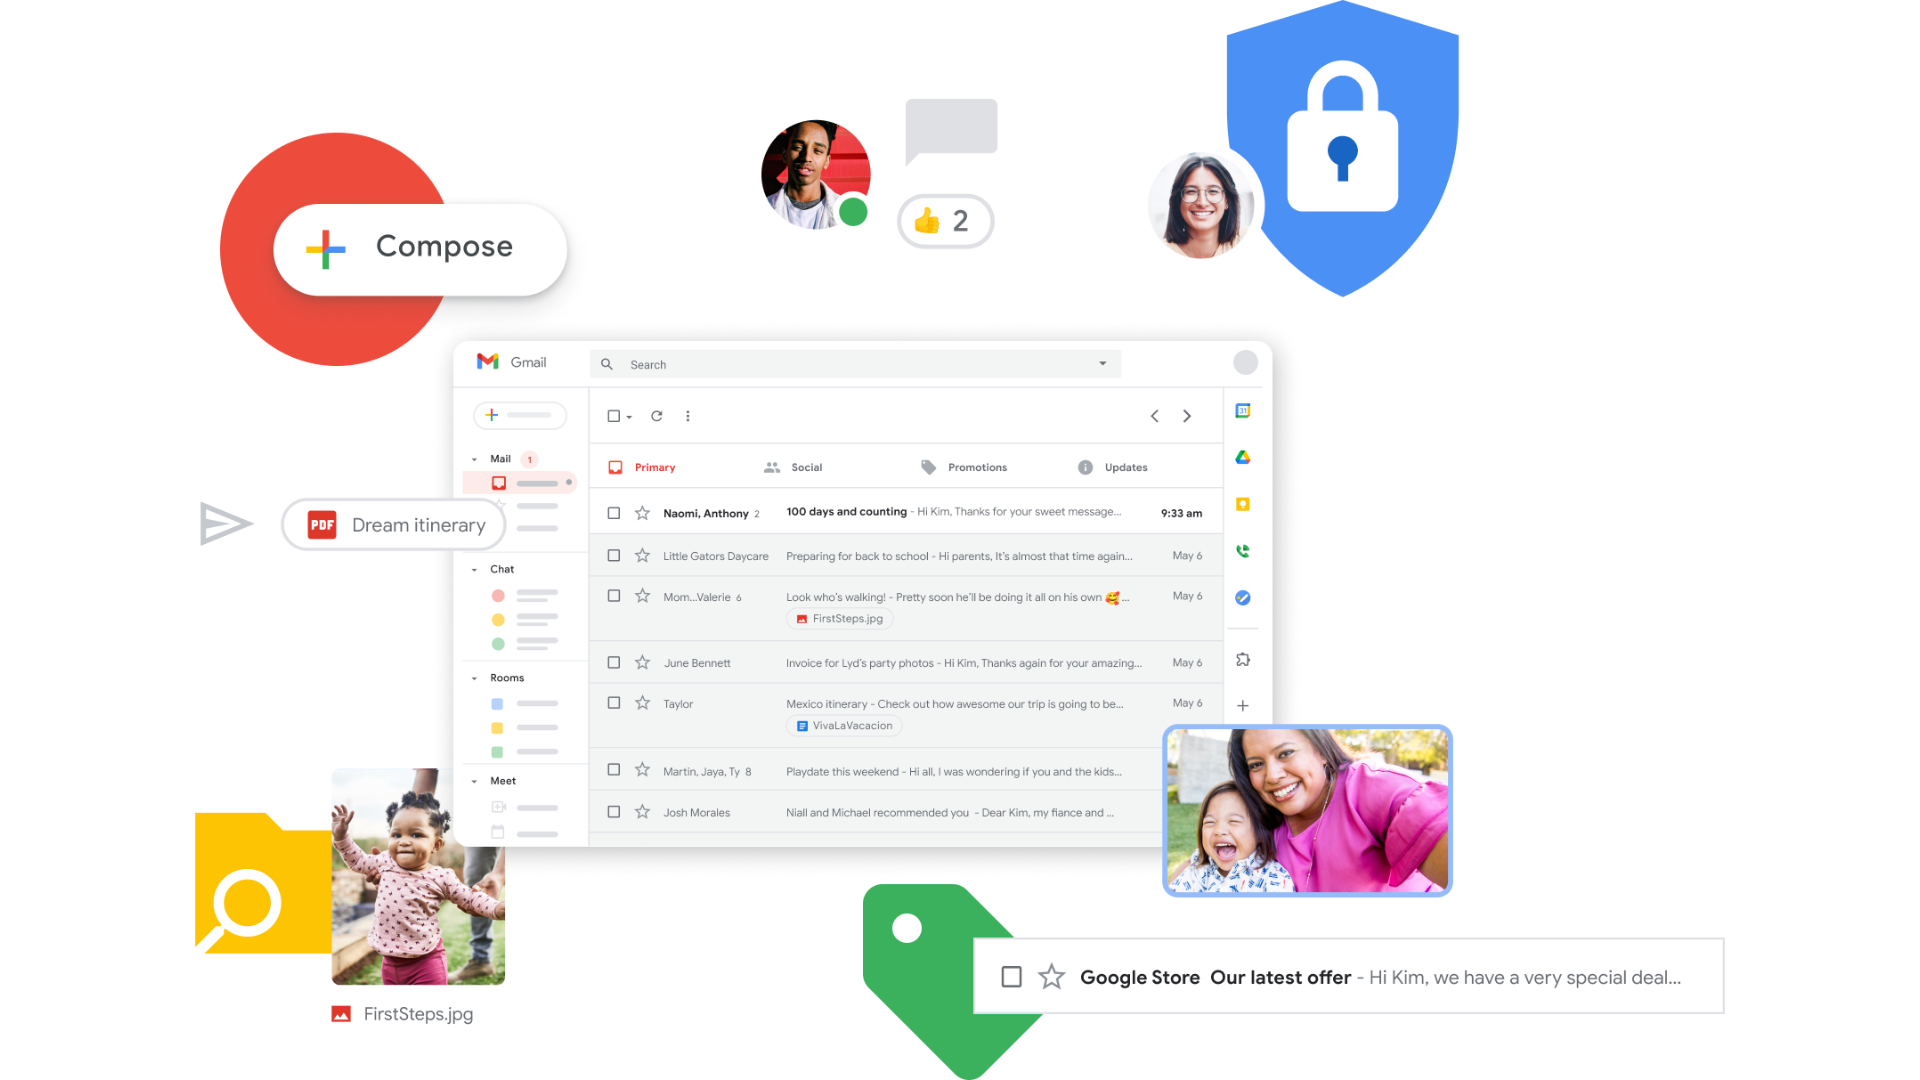 Gmail interface gets a new design for foldable phones